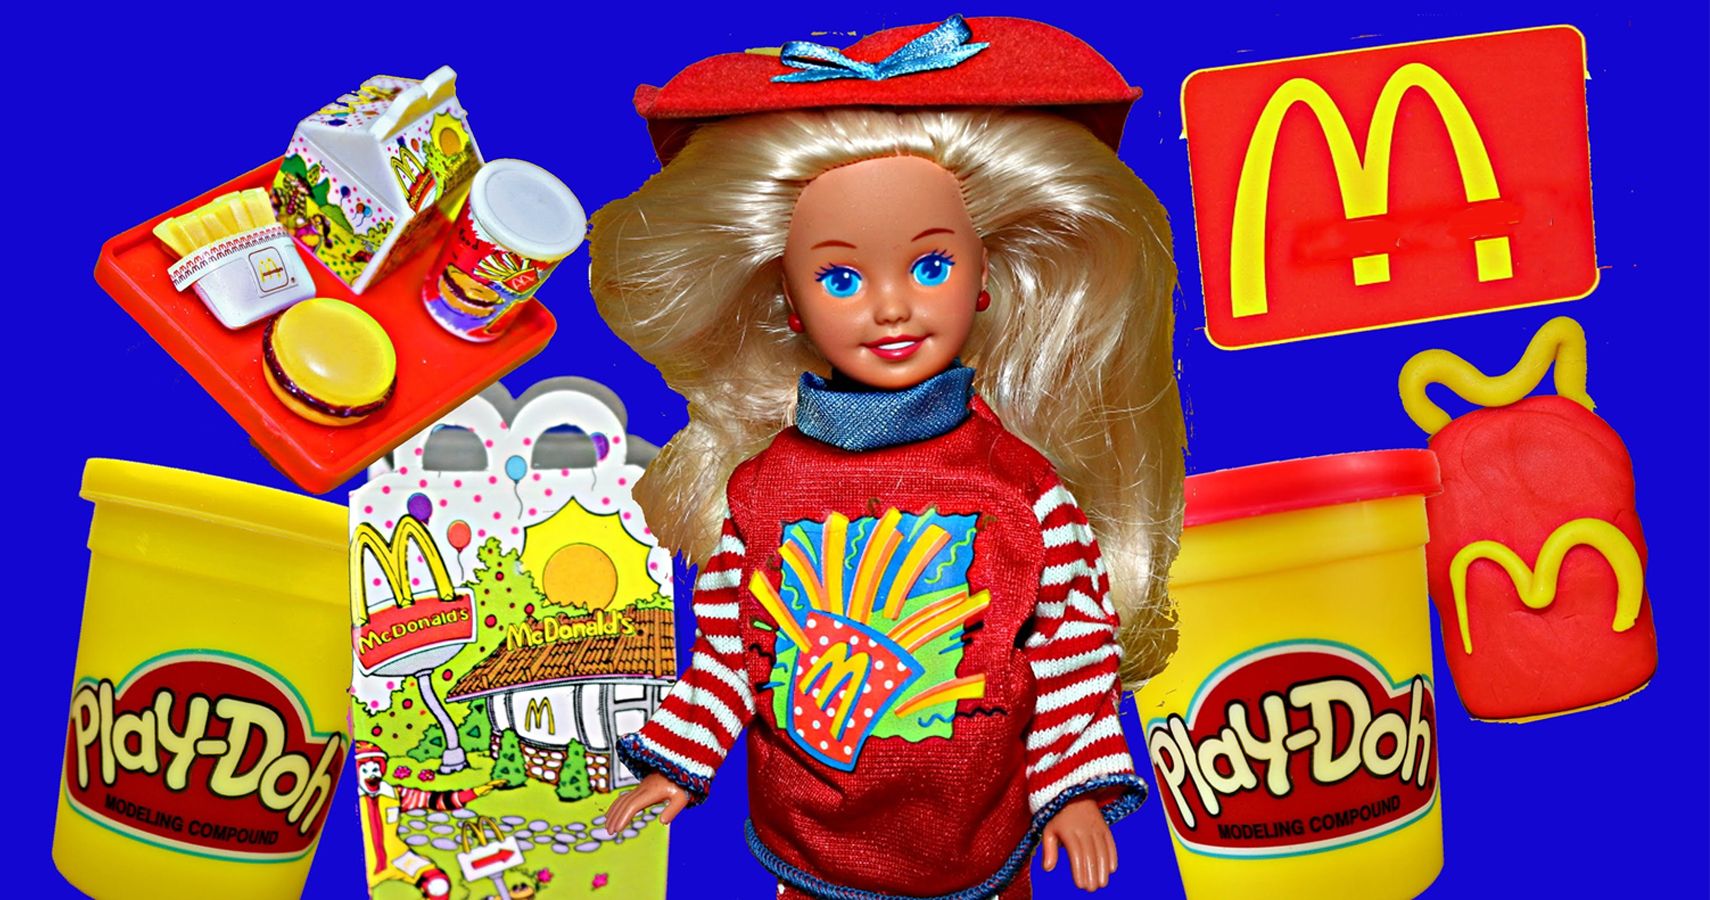 25 Rare Barbie Dolls You Just Can't Get Anymore